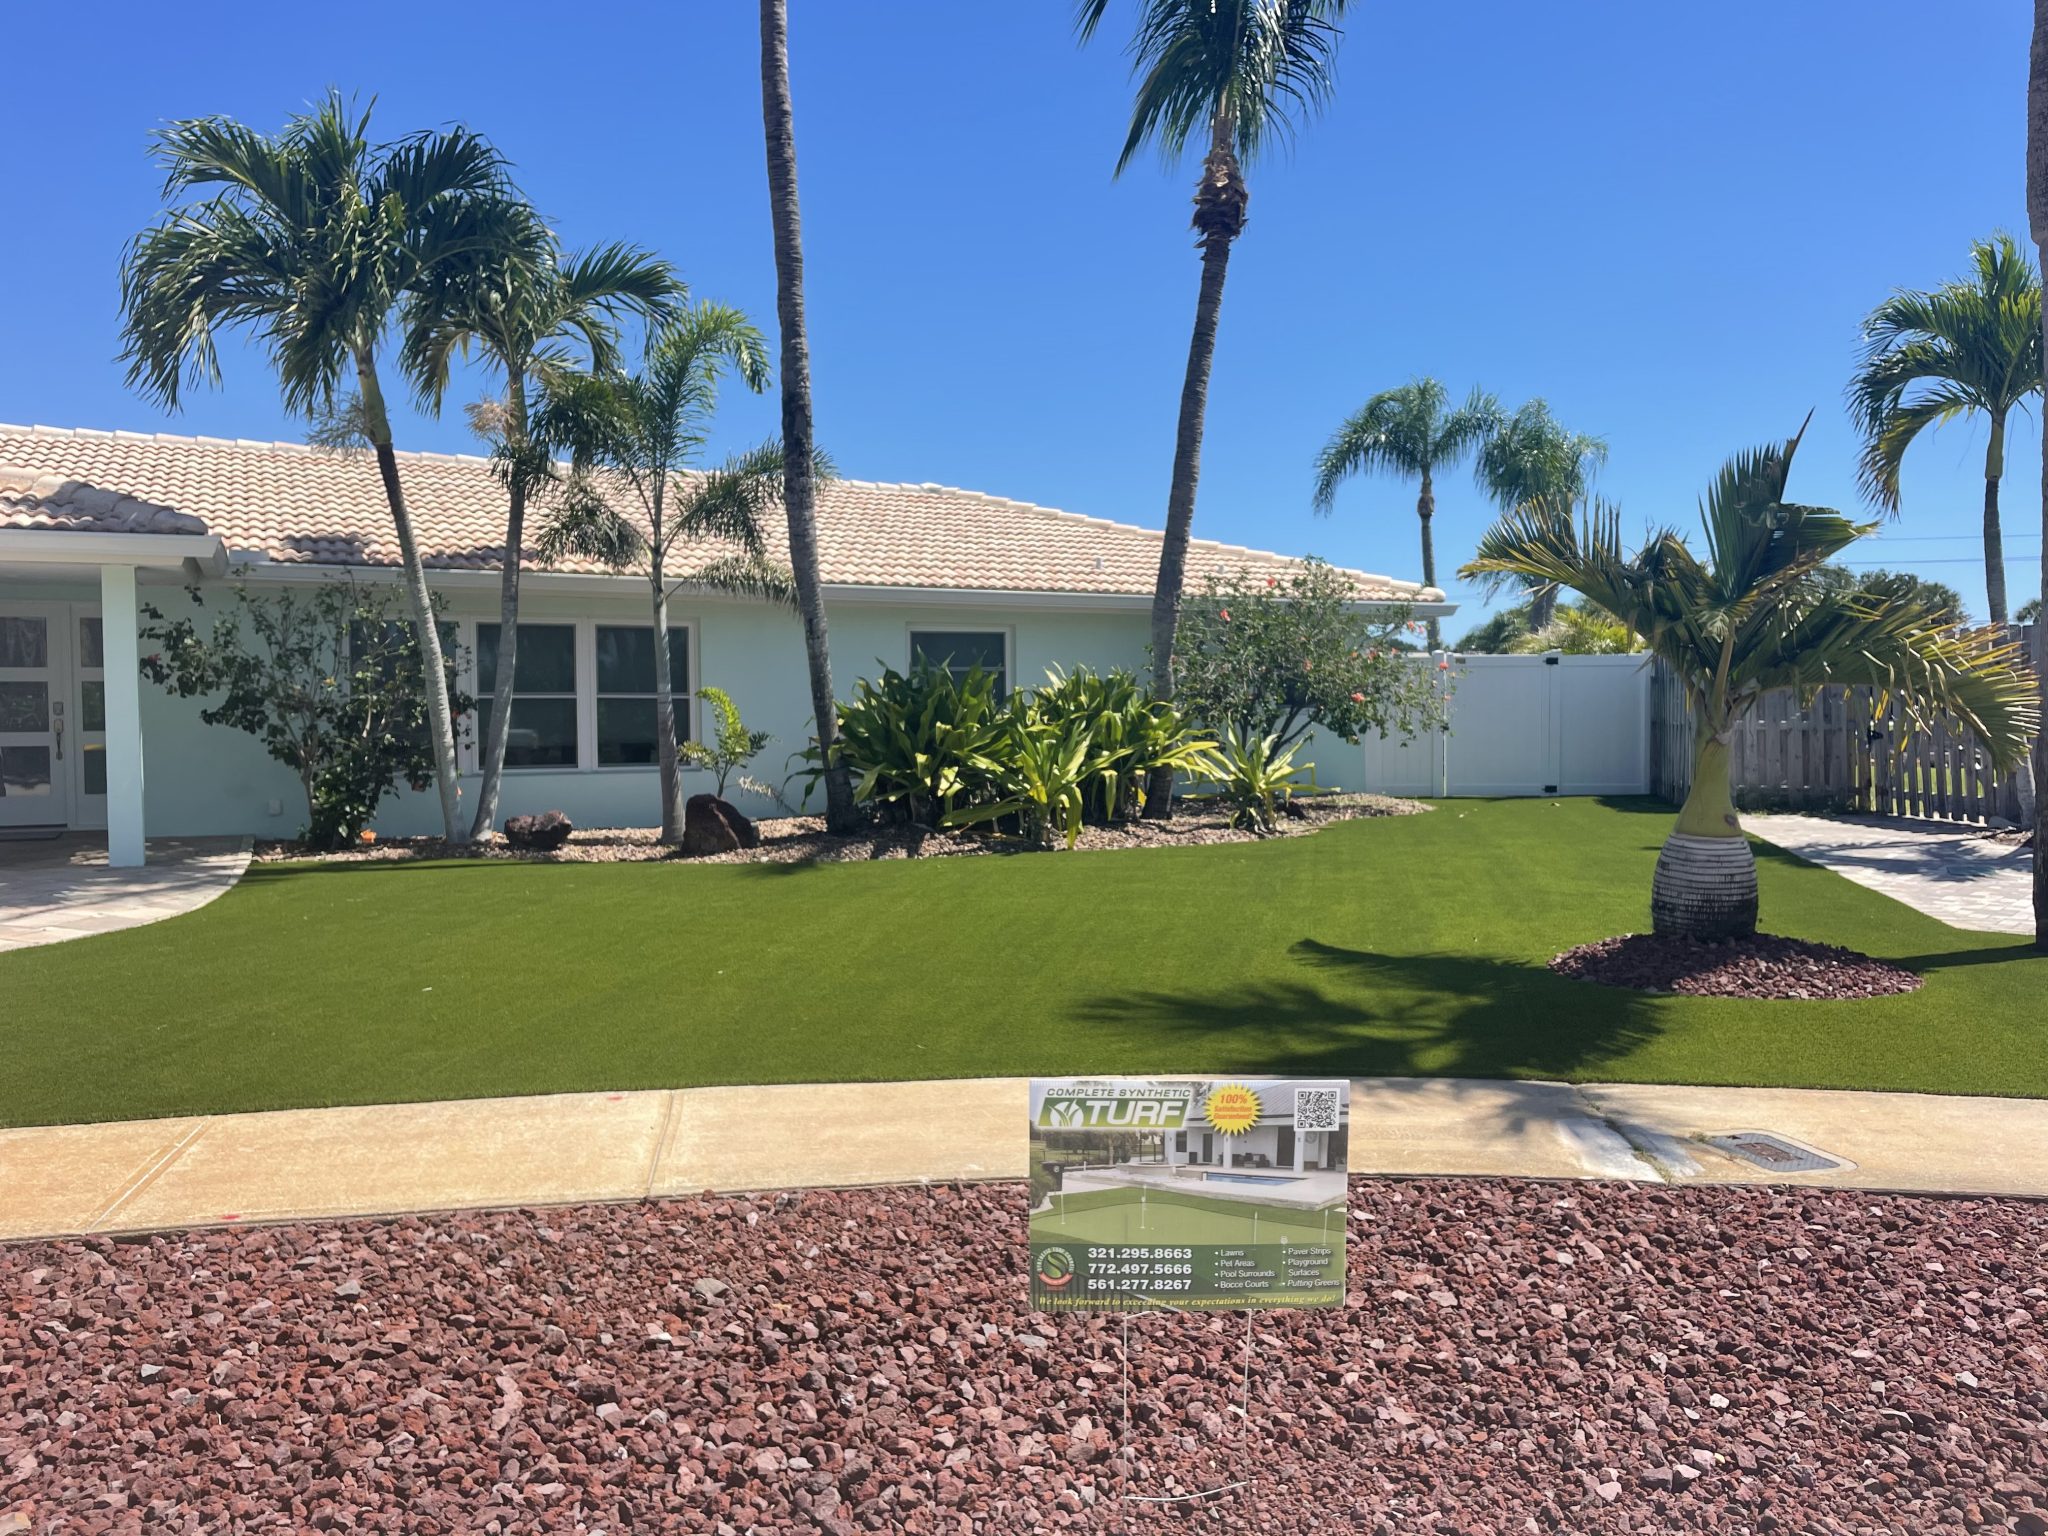 Artificial Grass Installation Space Coast - Complete Synthetic Turf